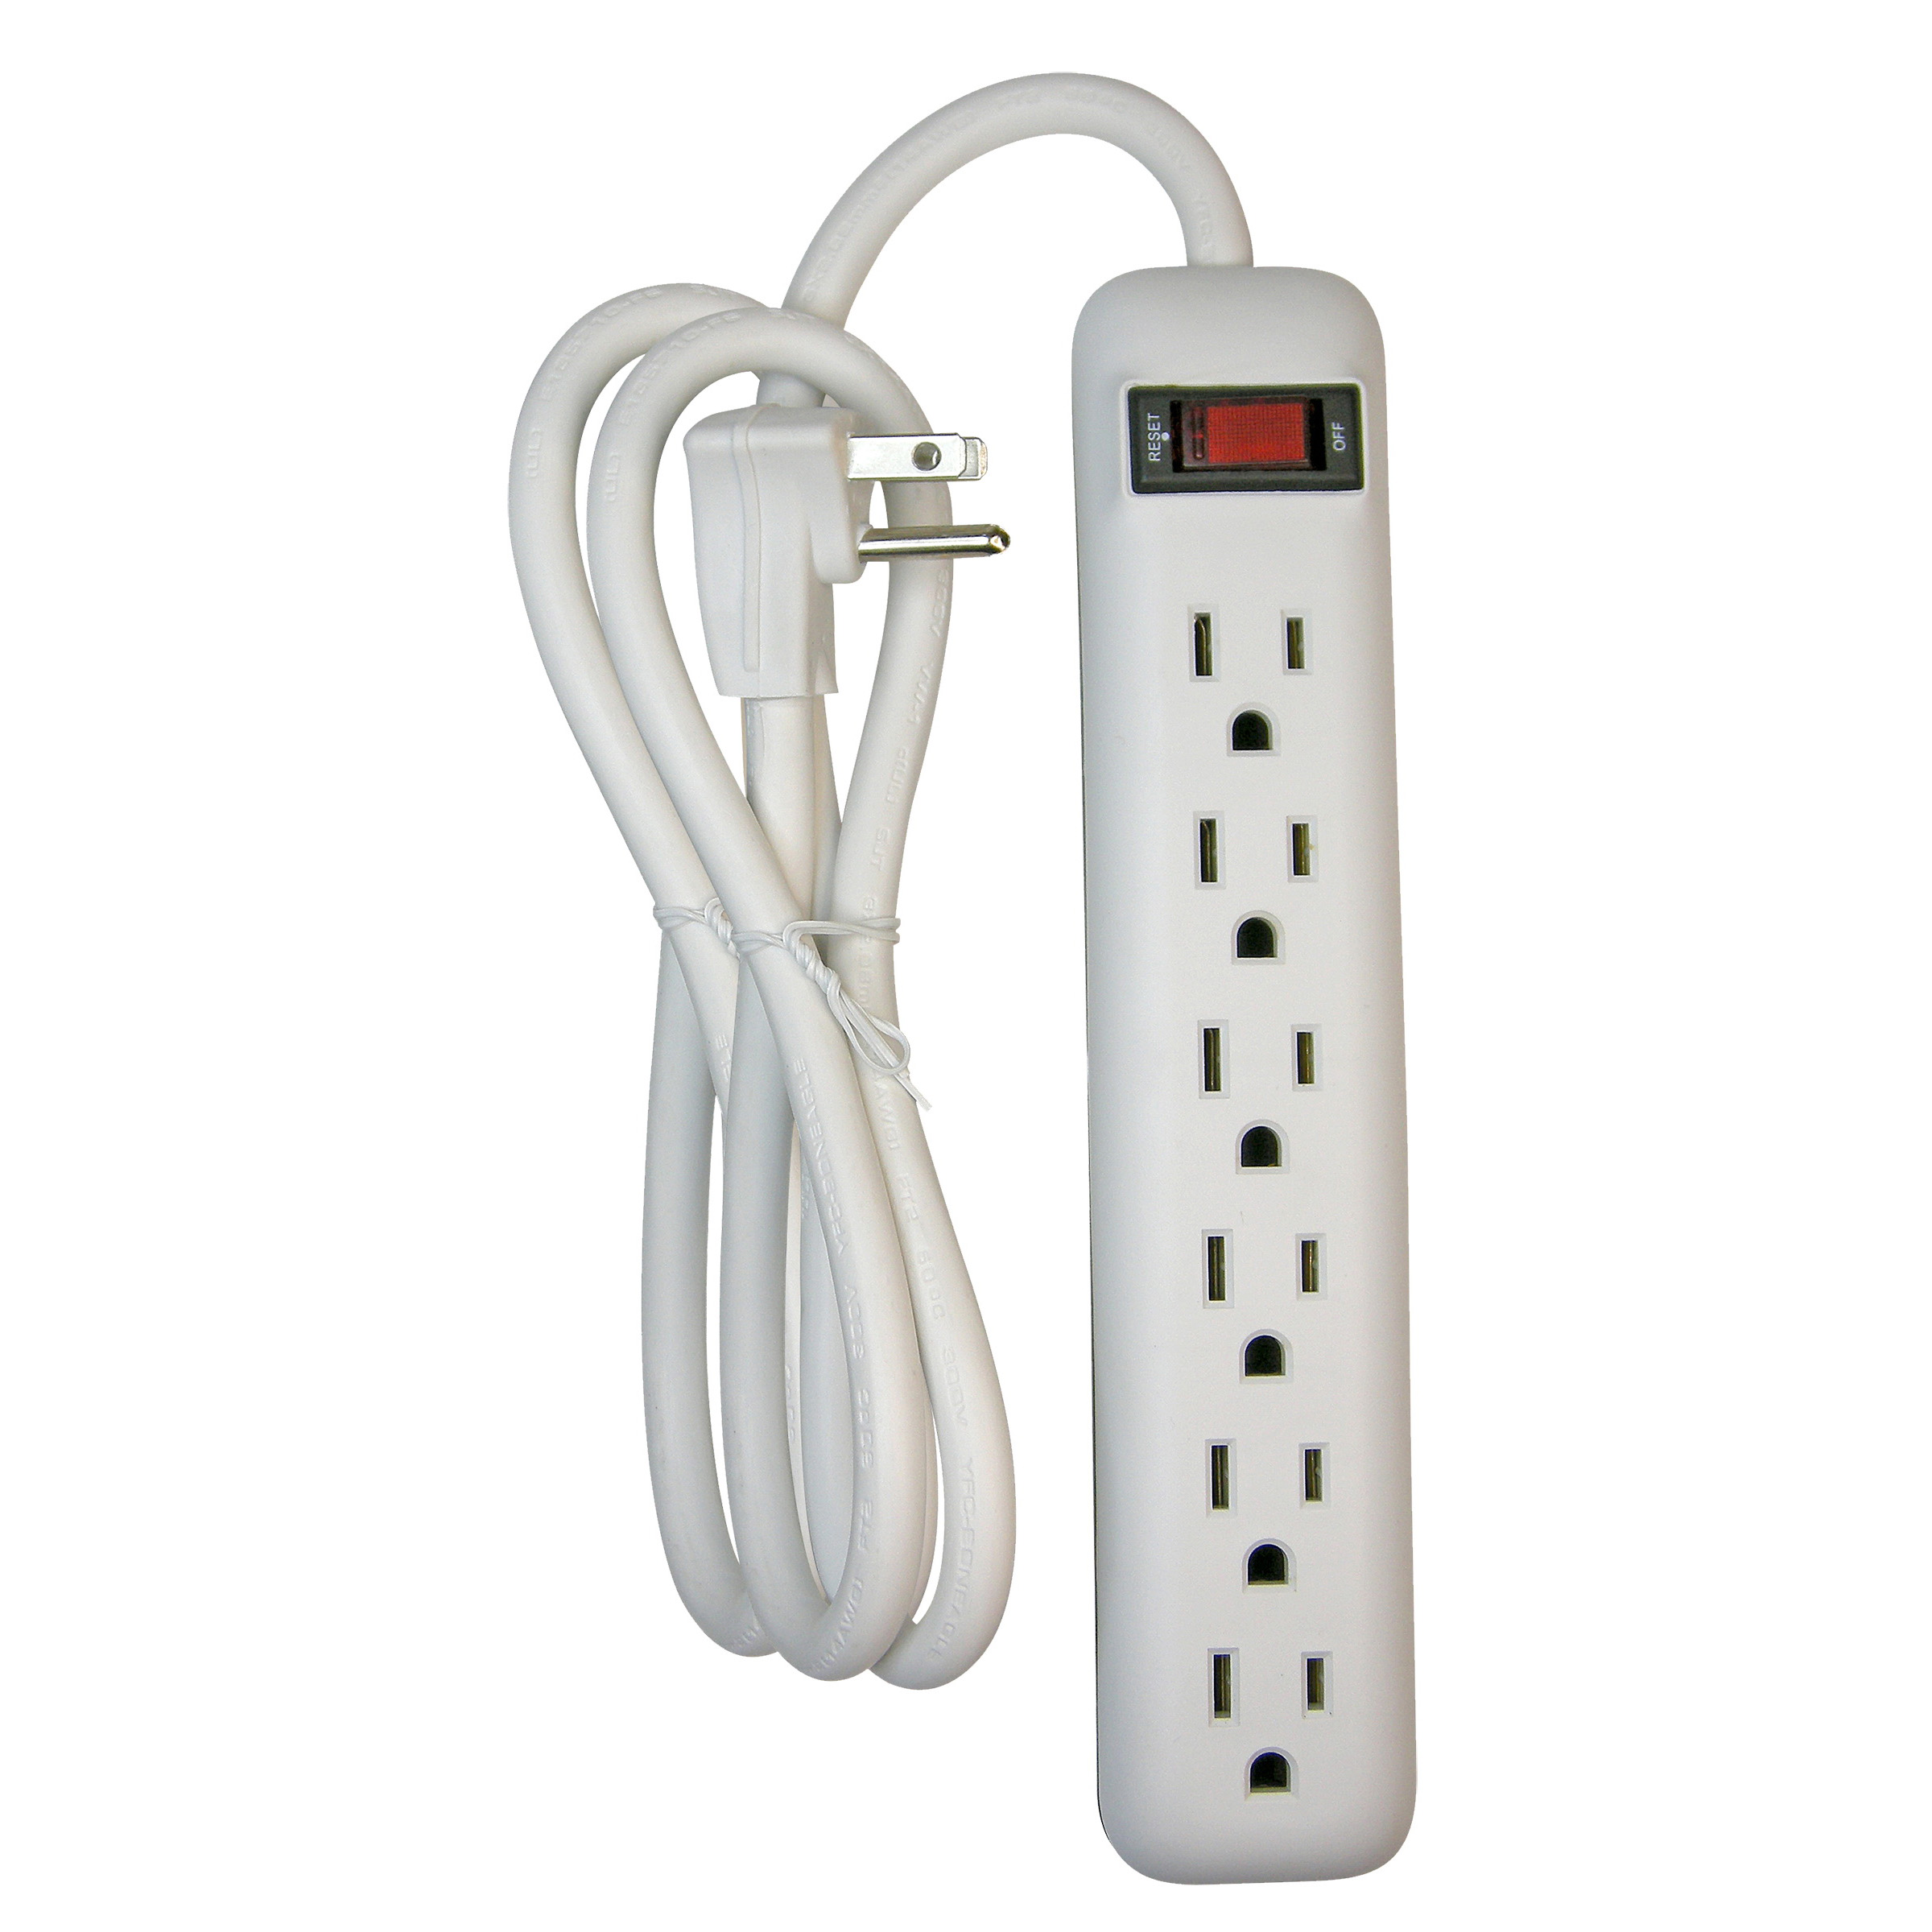 PowerZone OR801115 Power Outlet Strip, 6-Socket, 15 A, 8 ft L Cable, White - 1